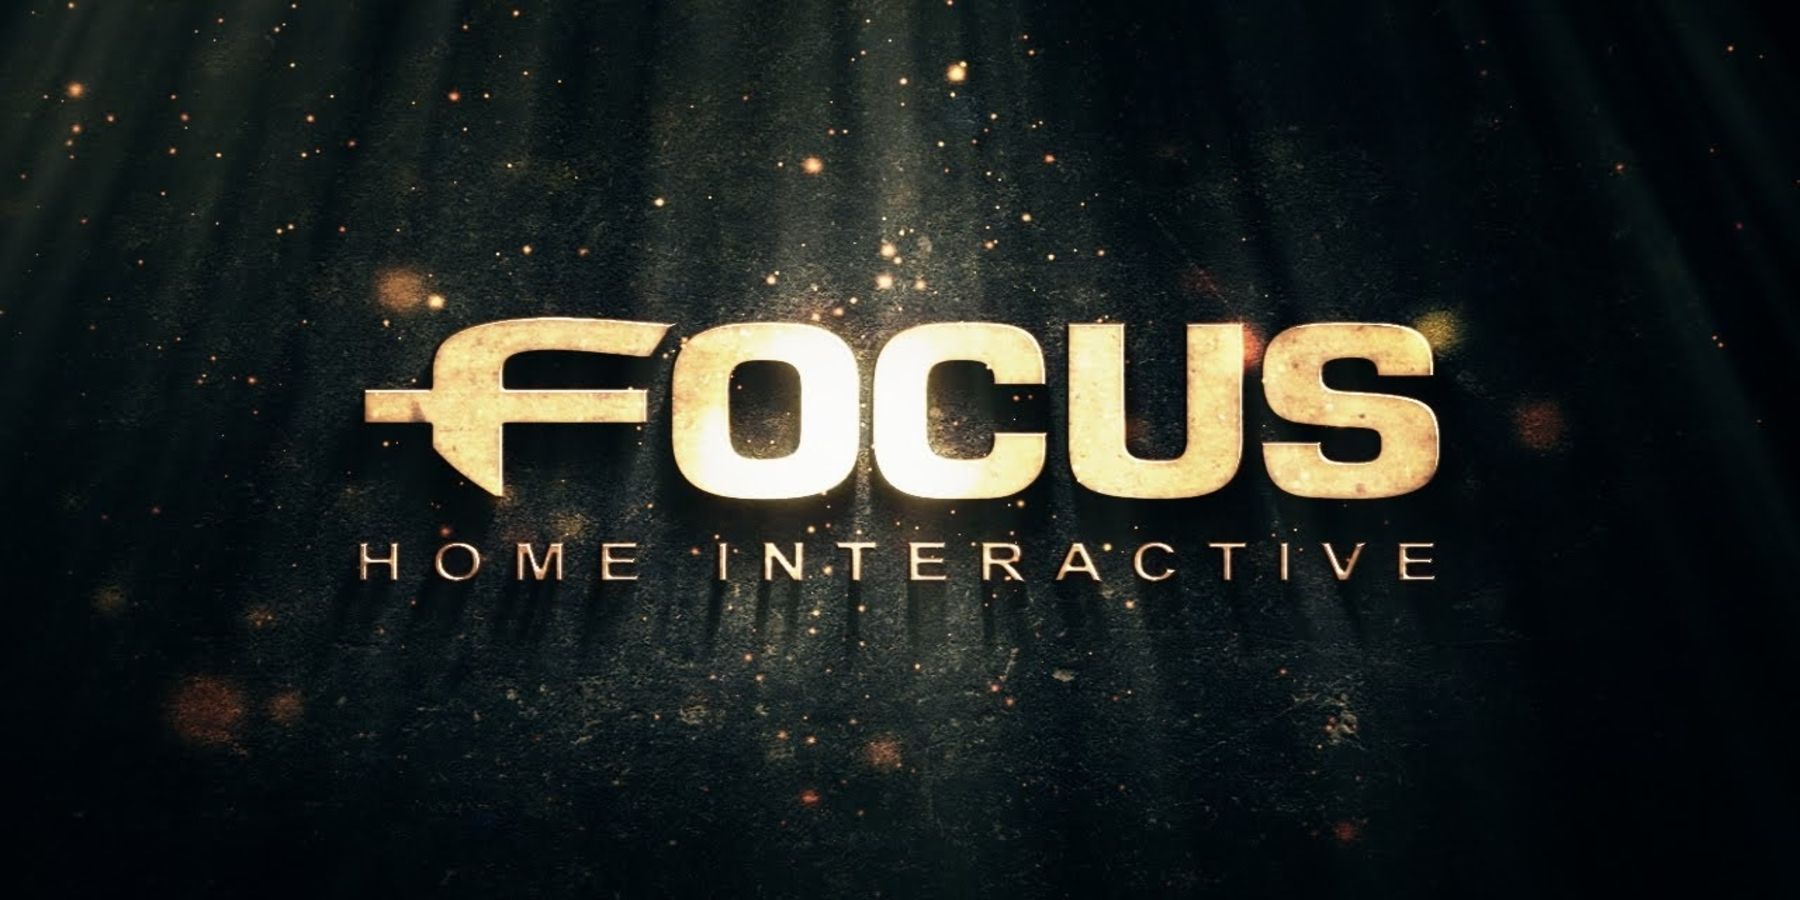 focus-home-interactive-is-re-branding-itself-with-a-new-name-1